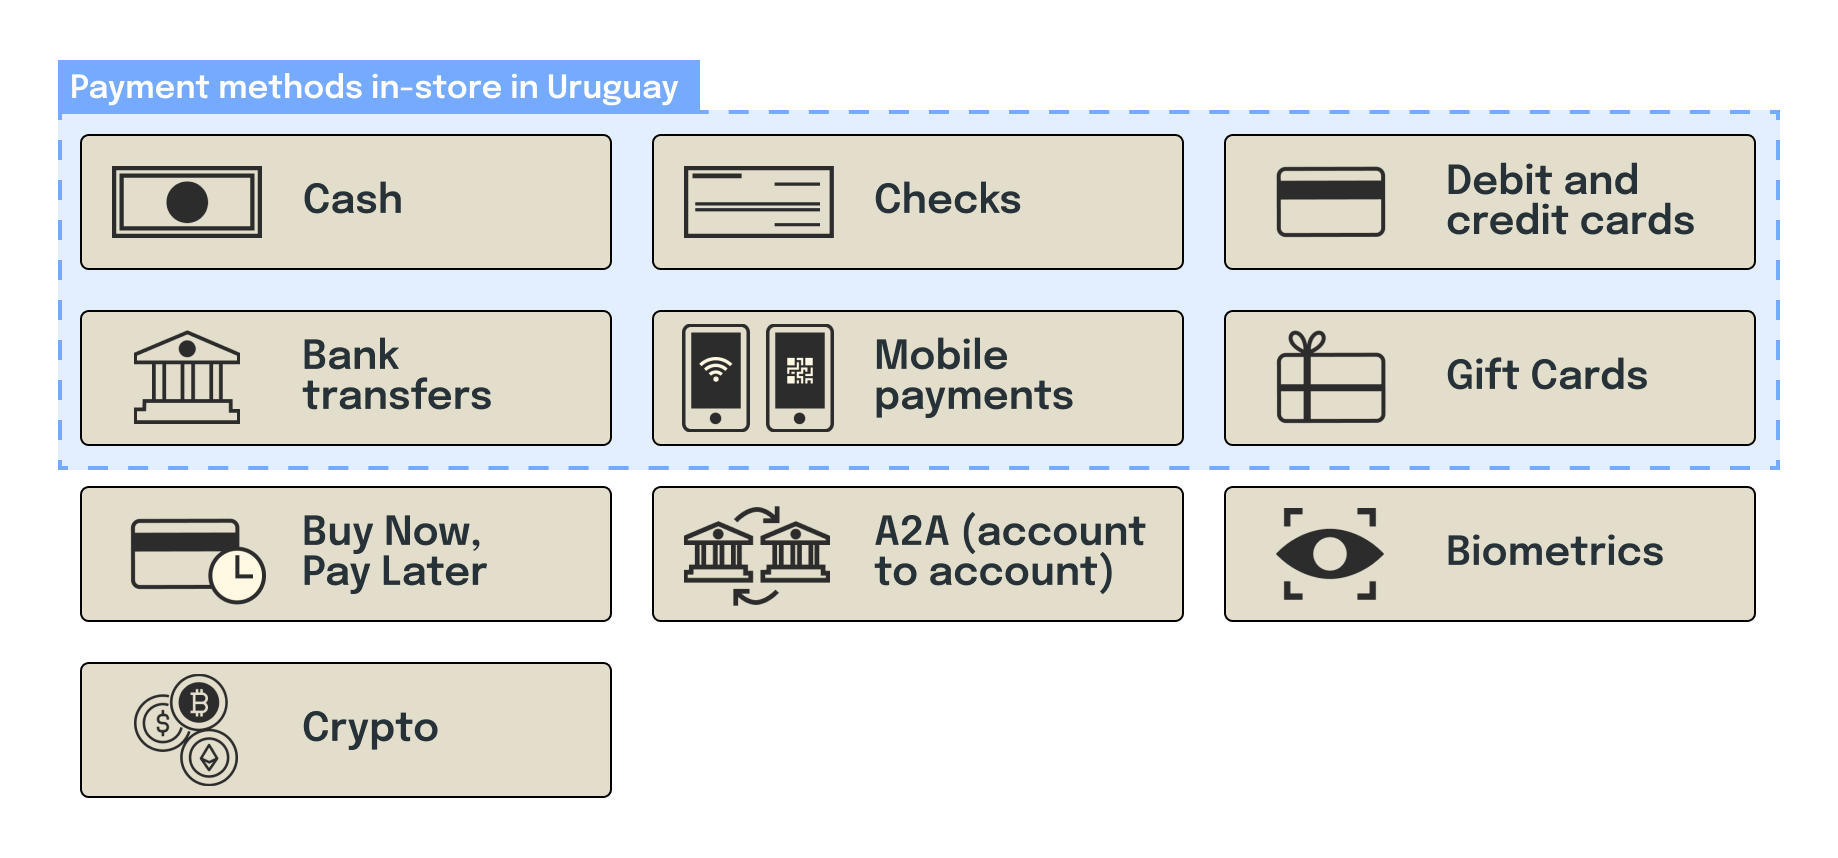 Payment methods in-store